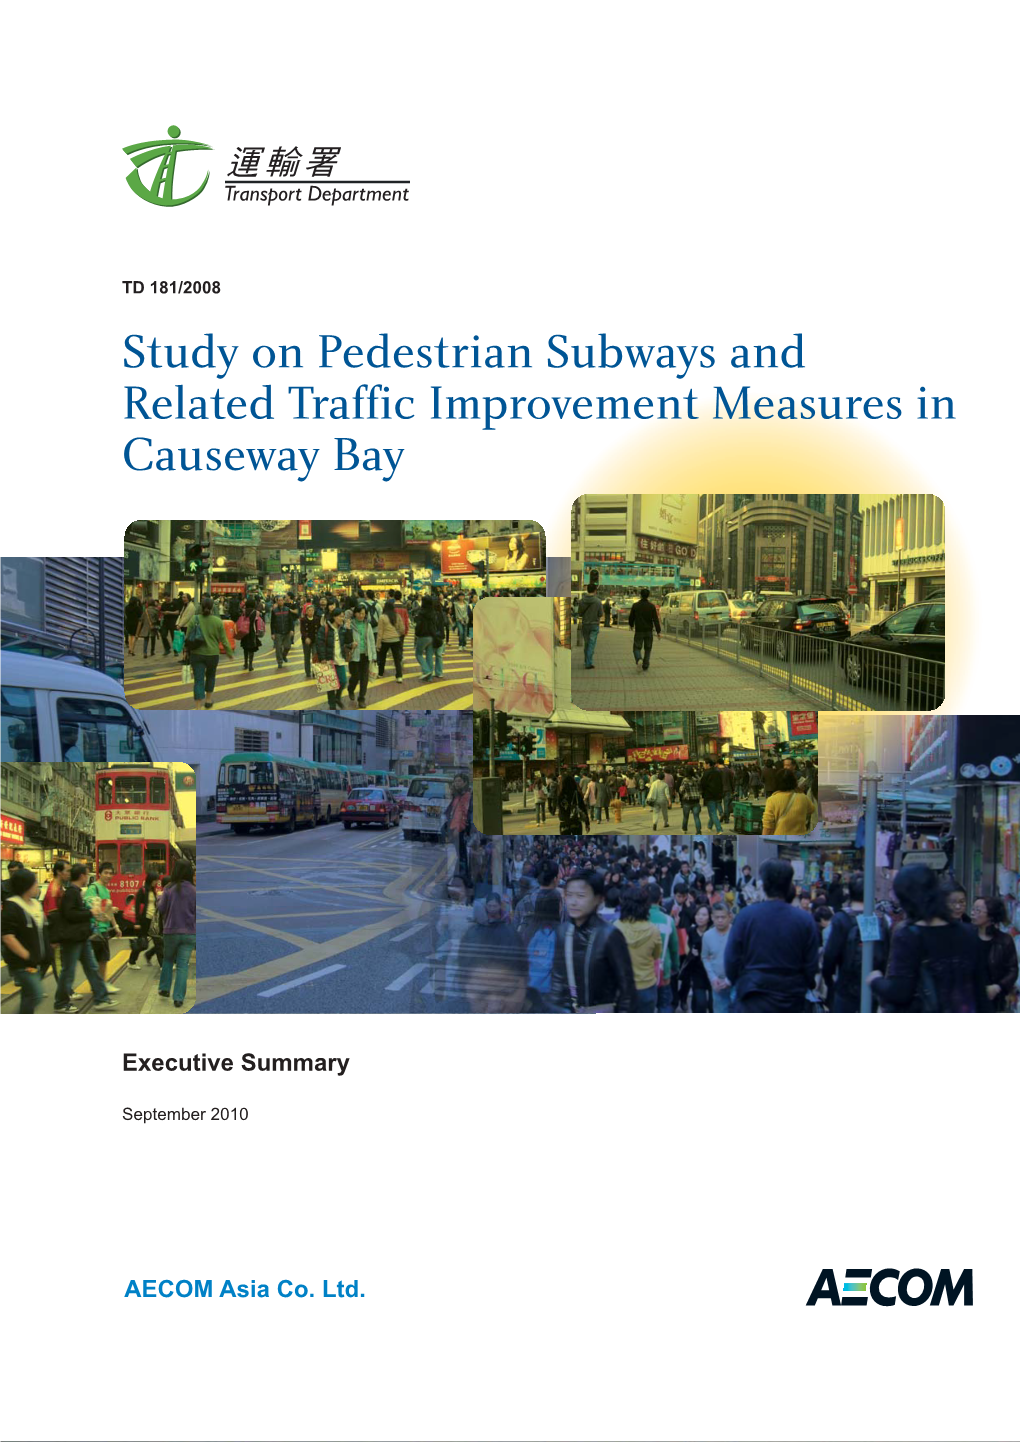 Study on Pedestrian Subways and Related Traffic Improvement Measures in Causeway Bay